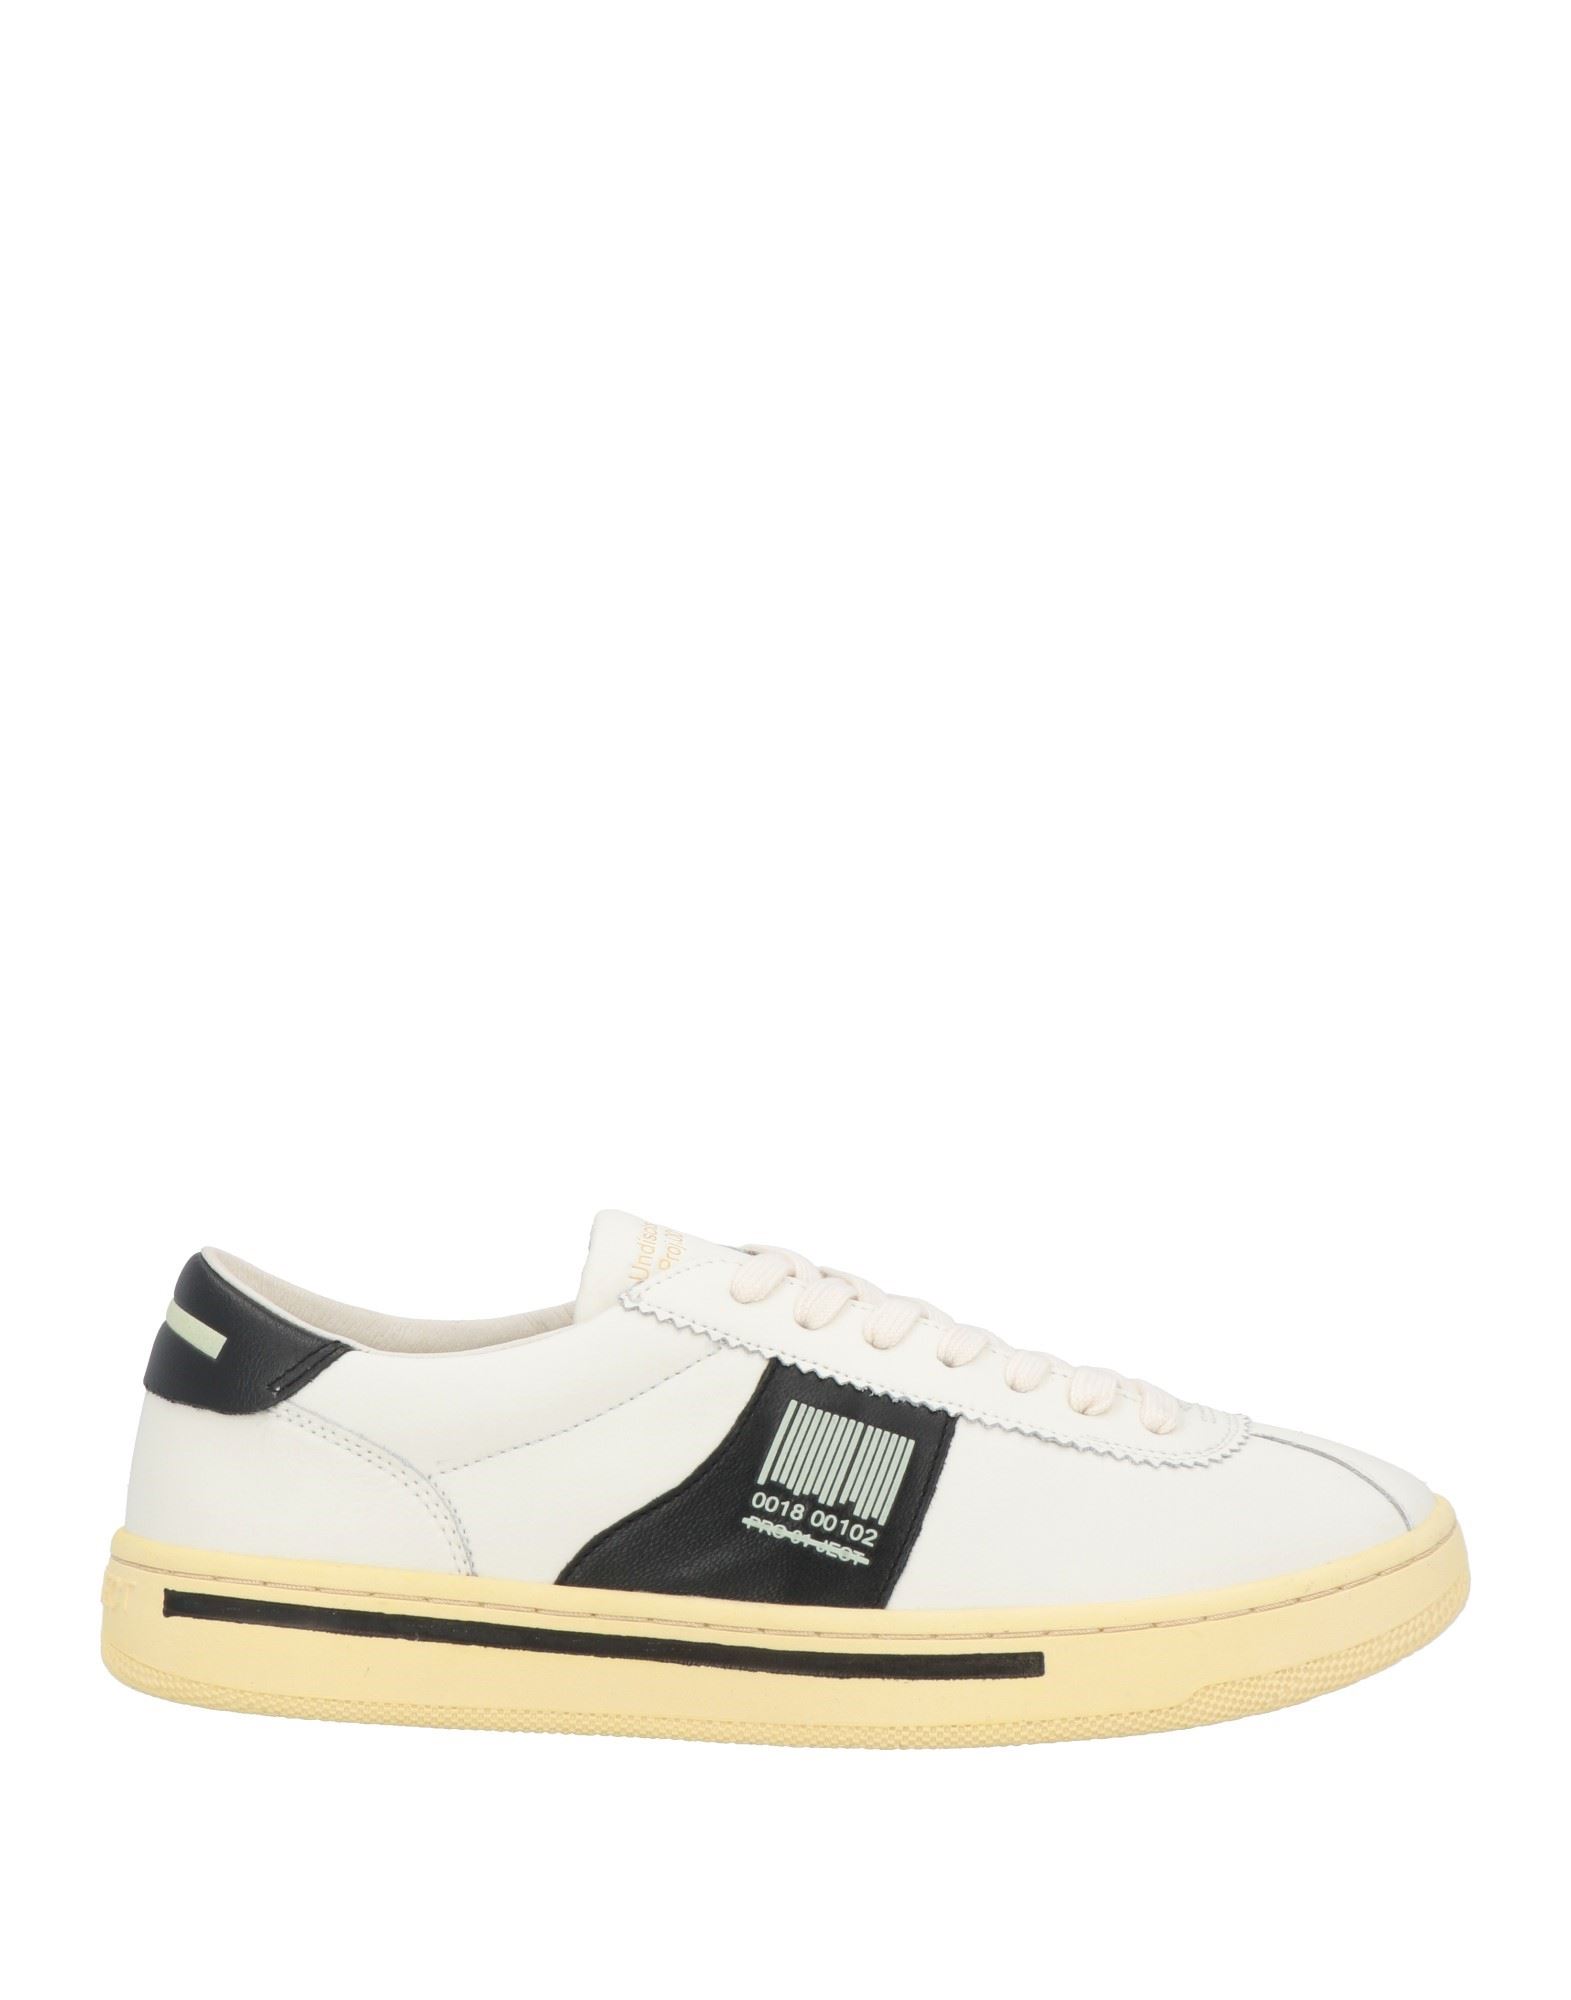 PRO 01 JECT Sneakers Herren Off white von PRO 01 JECT